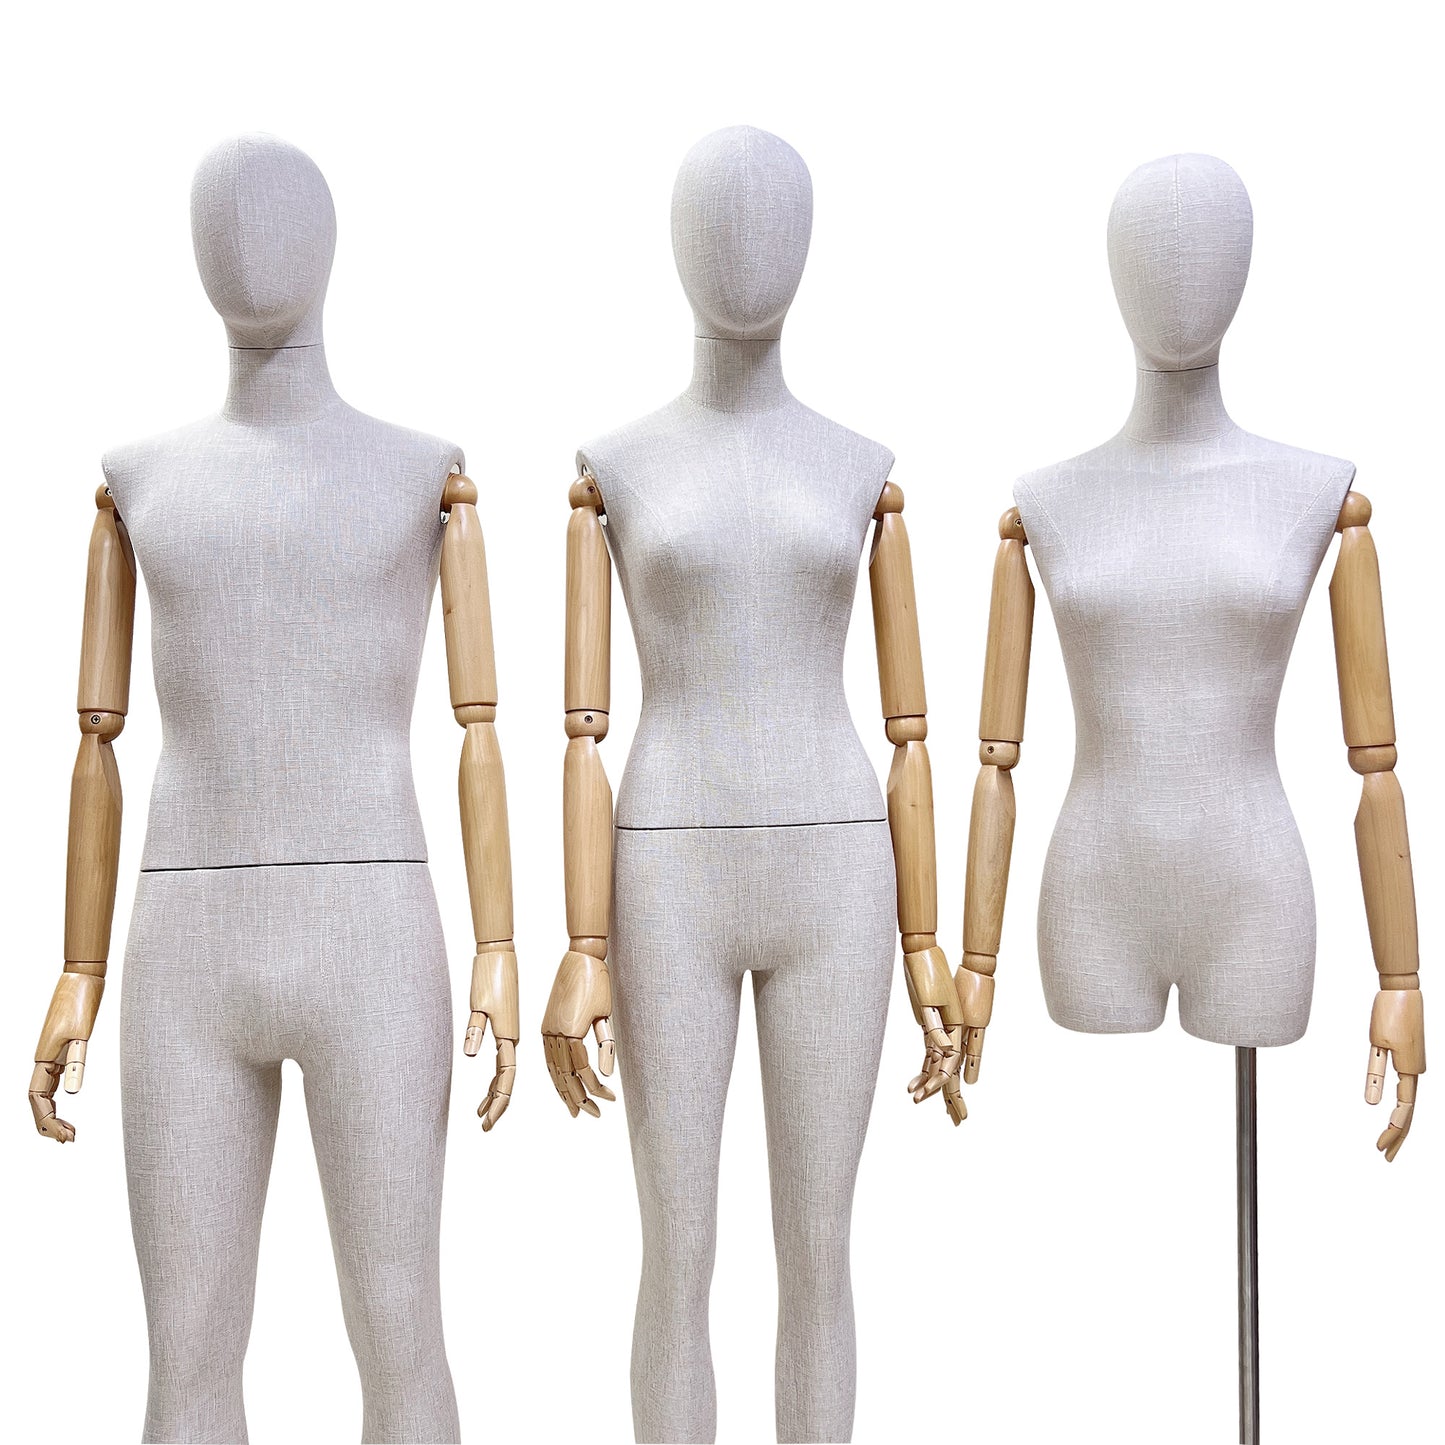 New Style Female|Male Bamboo Linen Mannequin Torso,Luxury High End Fabric Mannequin for Clothes Window Display,Full/Half Body Mannequin Torso